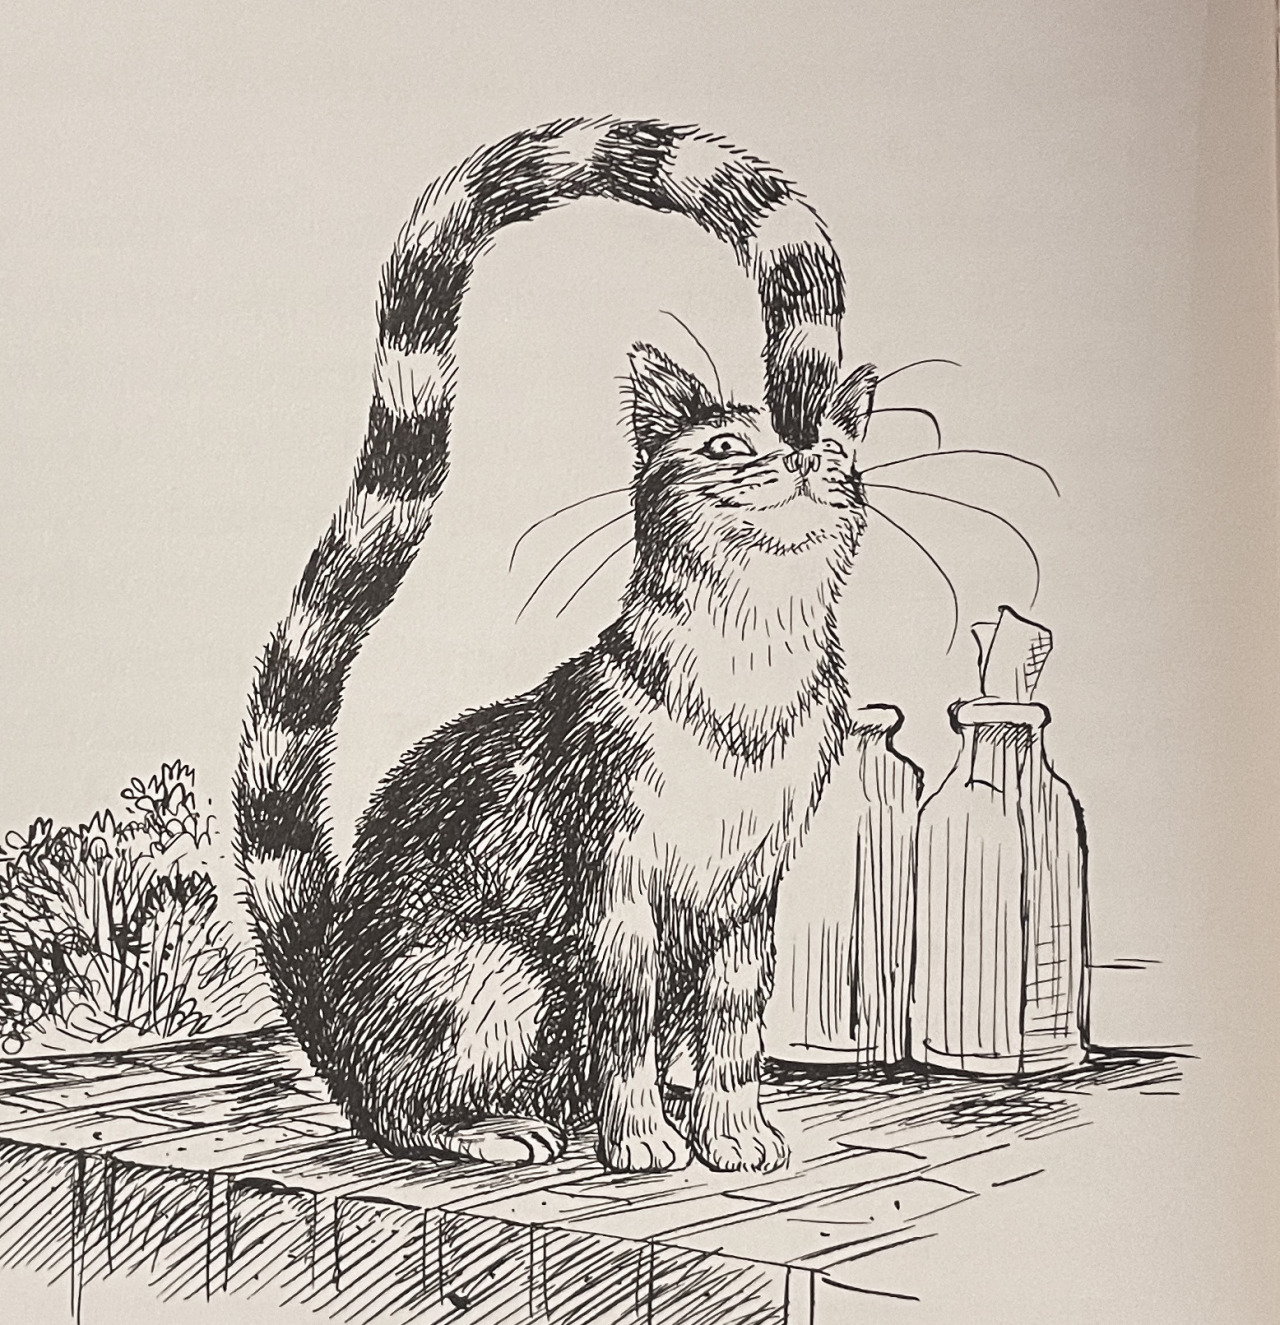 Black pen illustration of a shorthaired tabby cat sitting outside on a brick door stoop next to some glass milk bottles. The cat's tail is very long and reaches all the way up and over its back to boop its own nose.